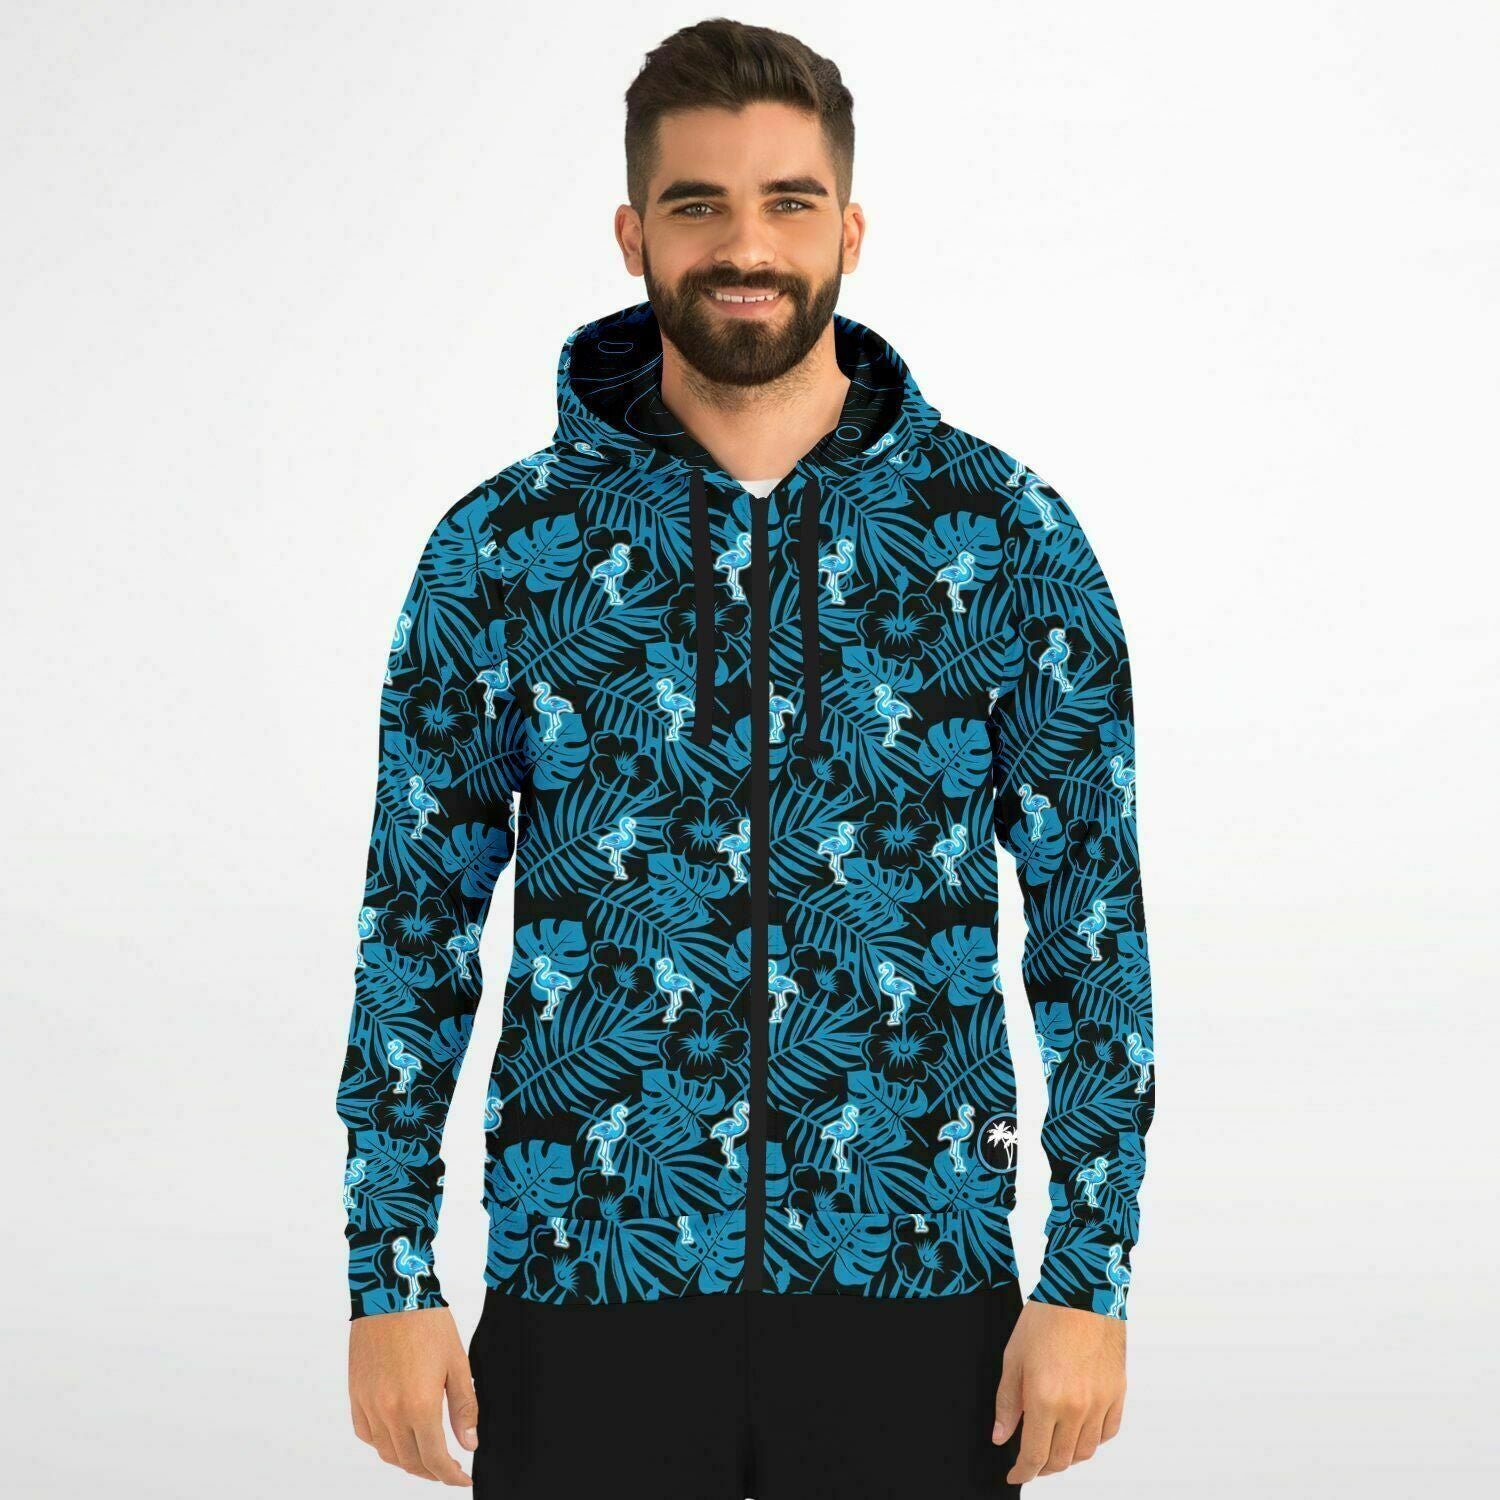 Rad Palm Party Like A Flock Star Zip Up Hoodie